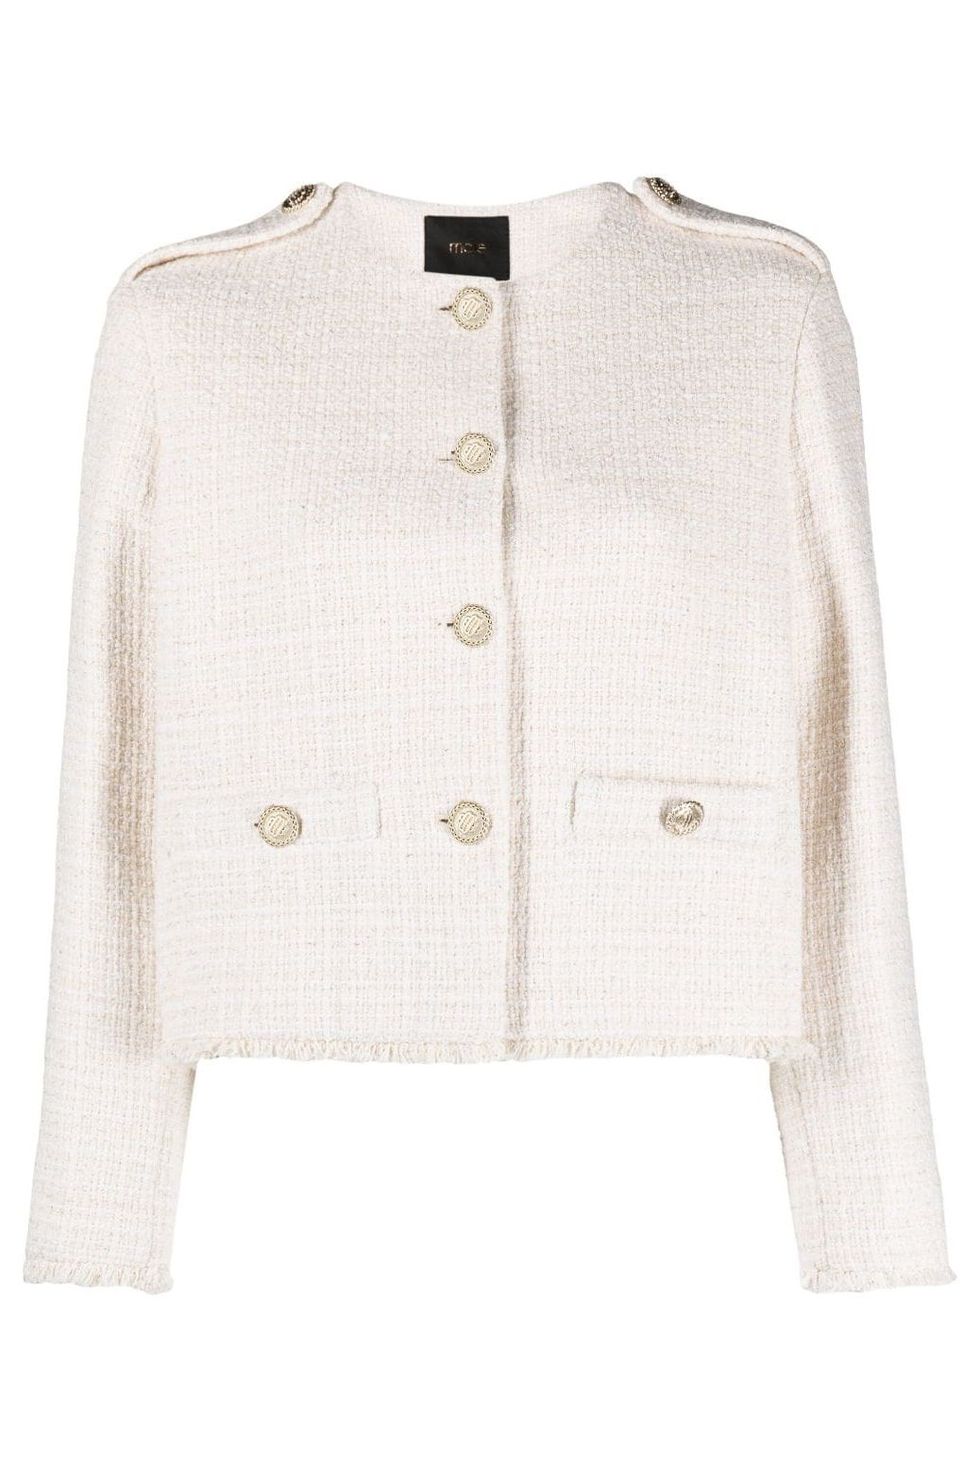 Kate embraces festive Style in a shimmering ivory tweed jacket